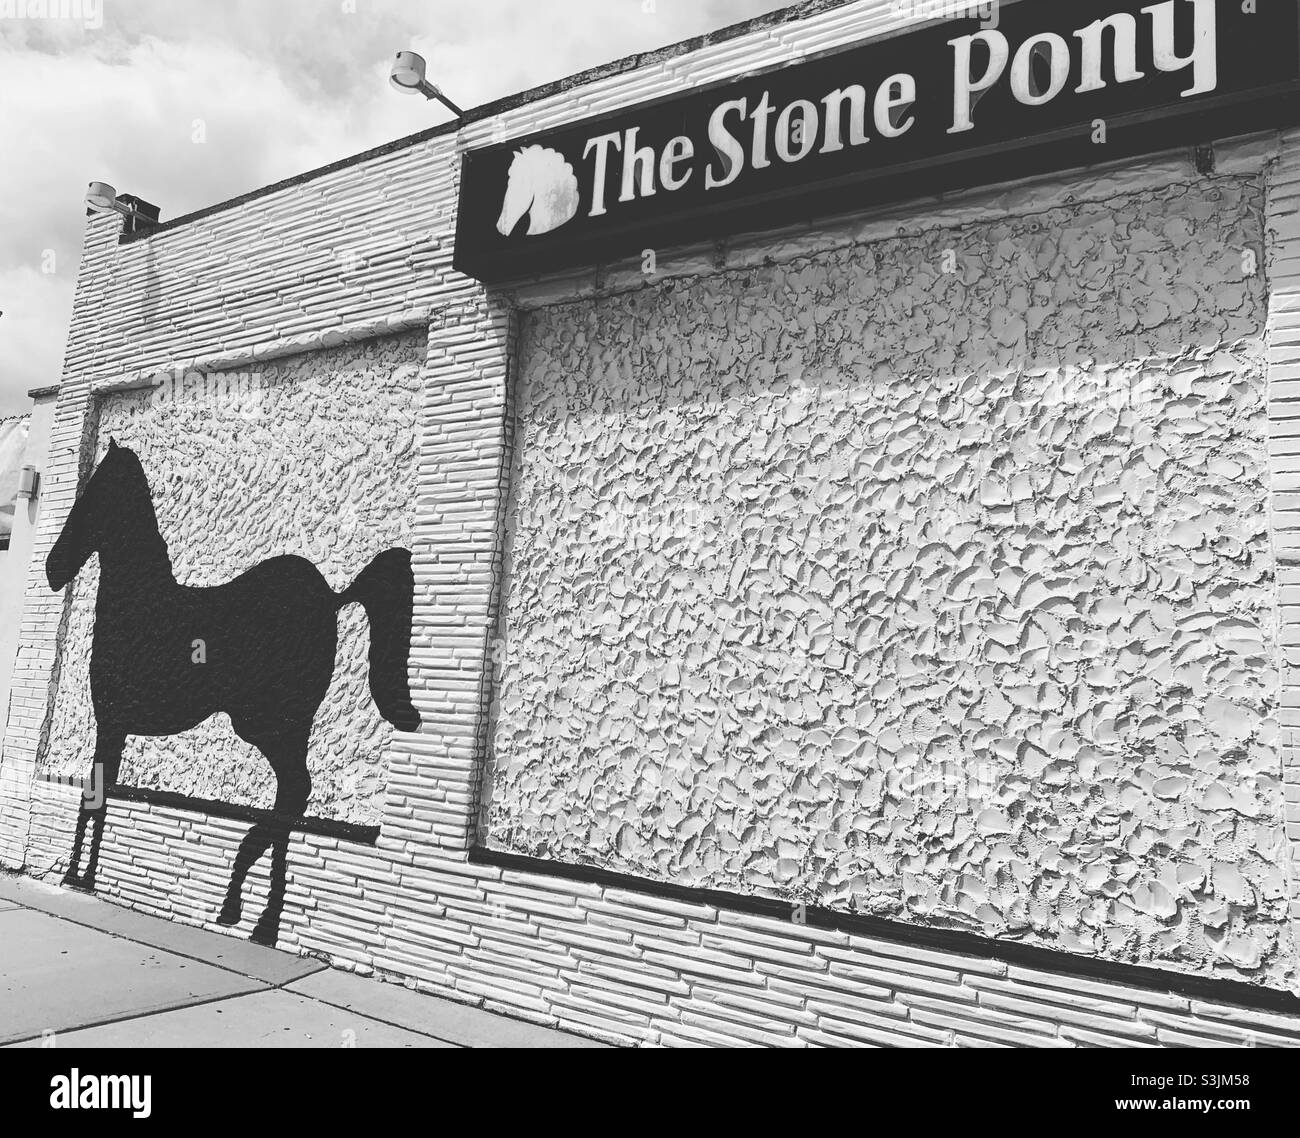 Die Stone Pony, in Asbury Park, Monmouth County, New Jersey, United States Stockfoto